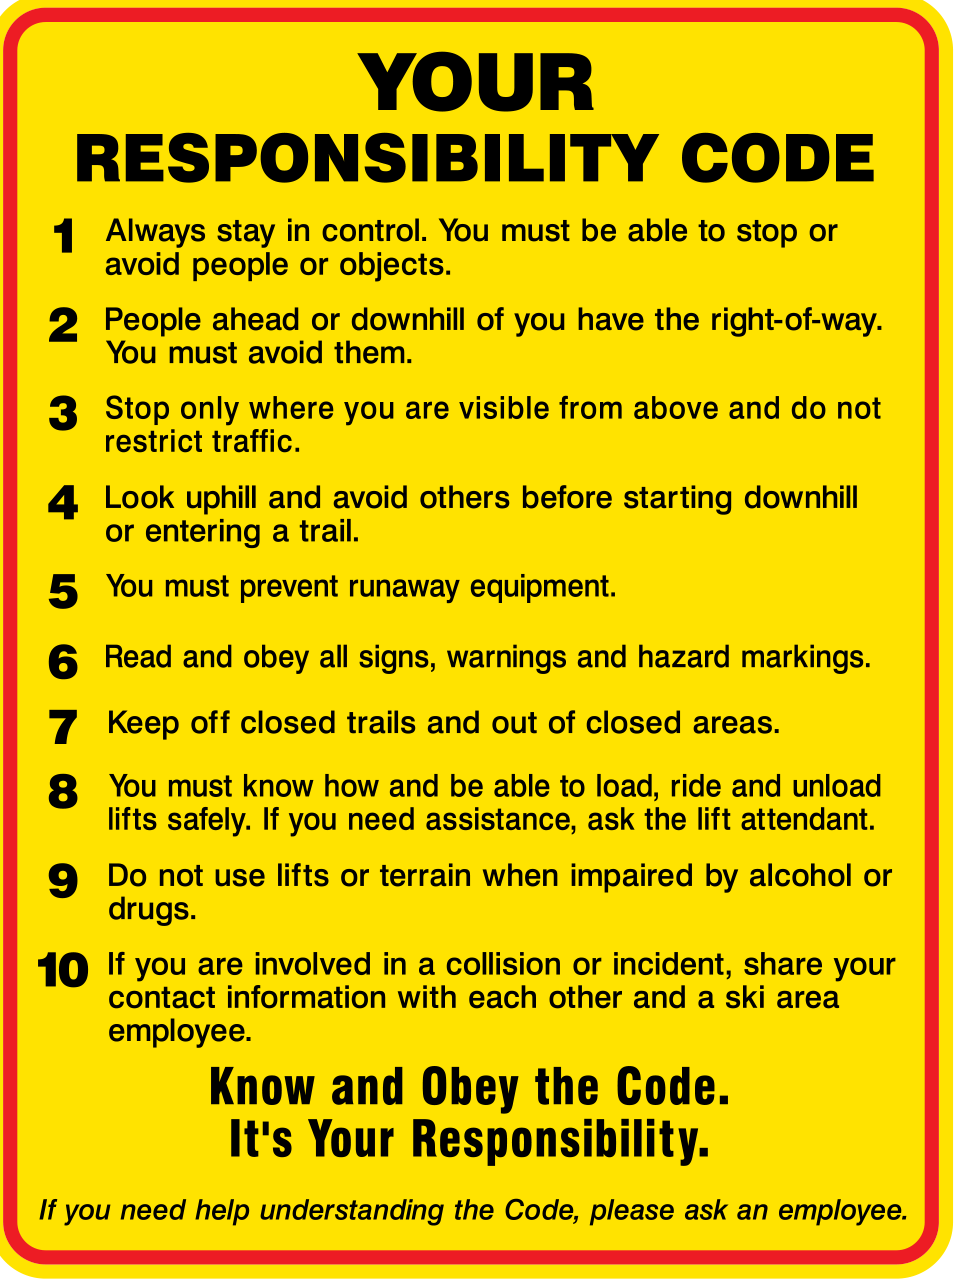 A yellow sign with red border and black text stating YOUR RESPONSIBILITY CODE with 10 rules listed